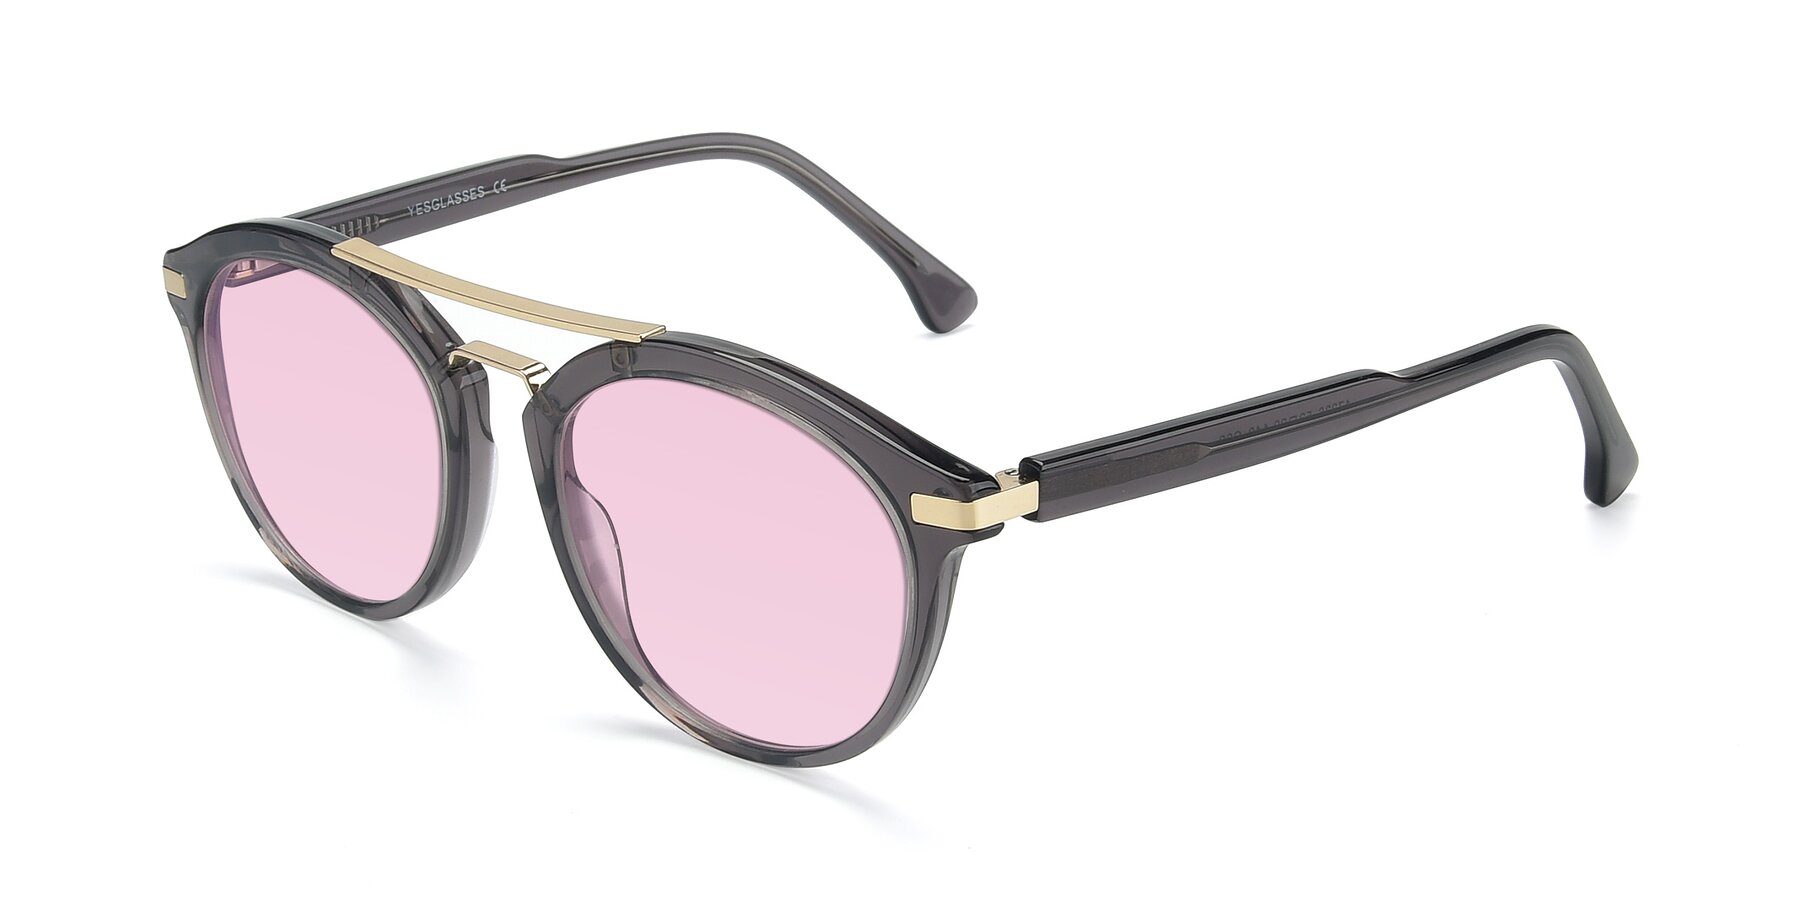 Angle of 17236 in Gray-Gold with Light Pink Tinted Lenses